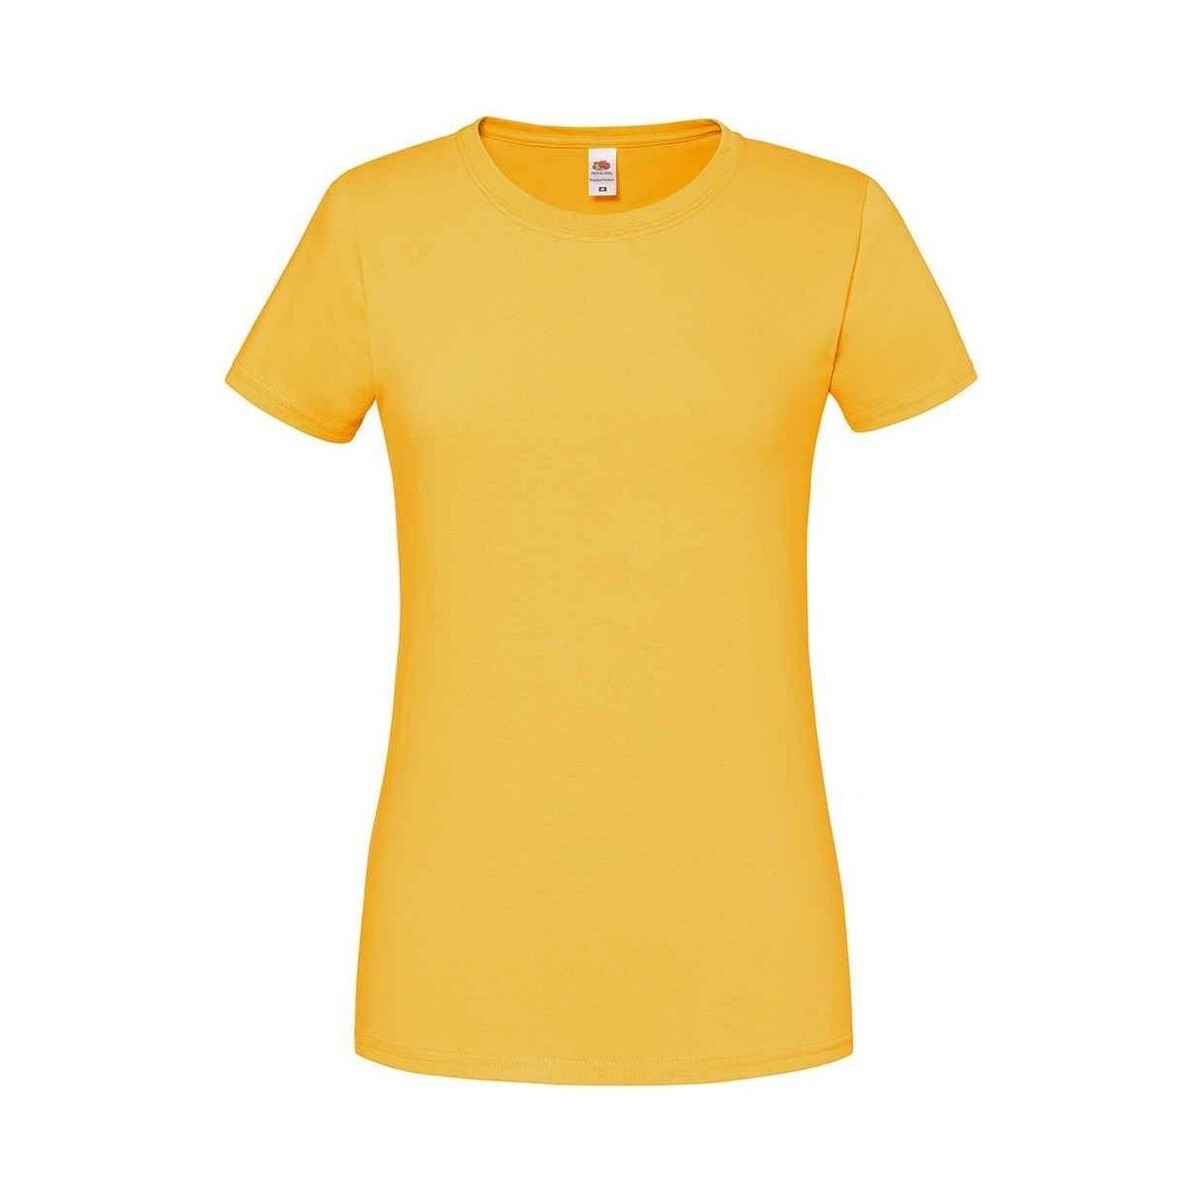 Vêtements Femme T-shirts manches longues Fruit Of The Loom Iconic Multicolore